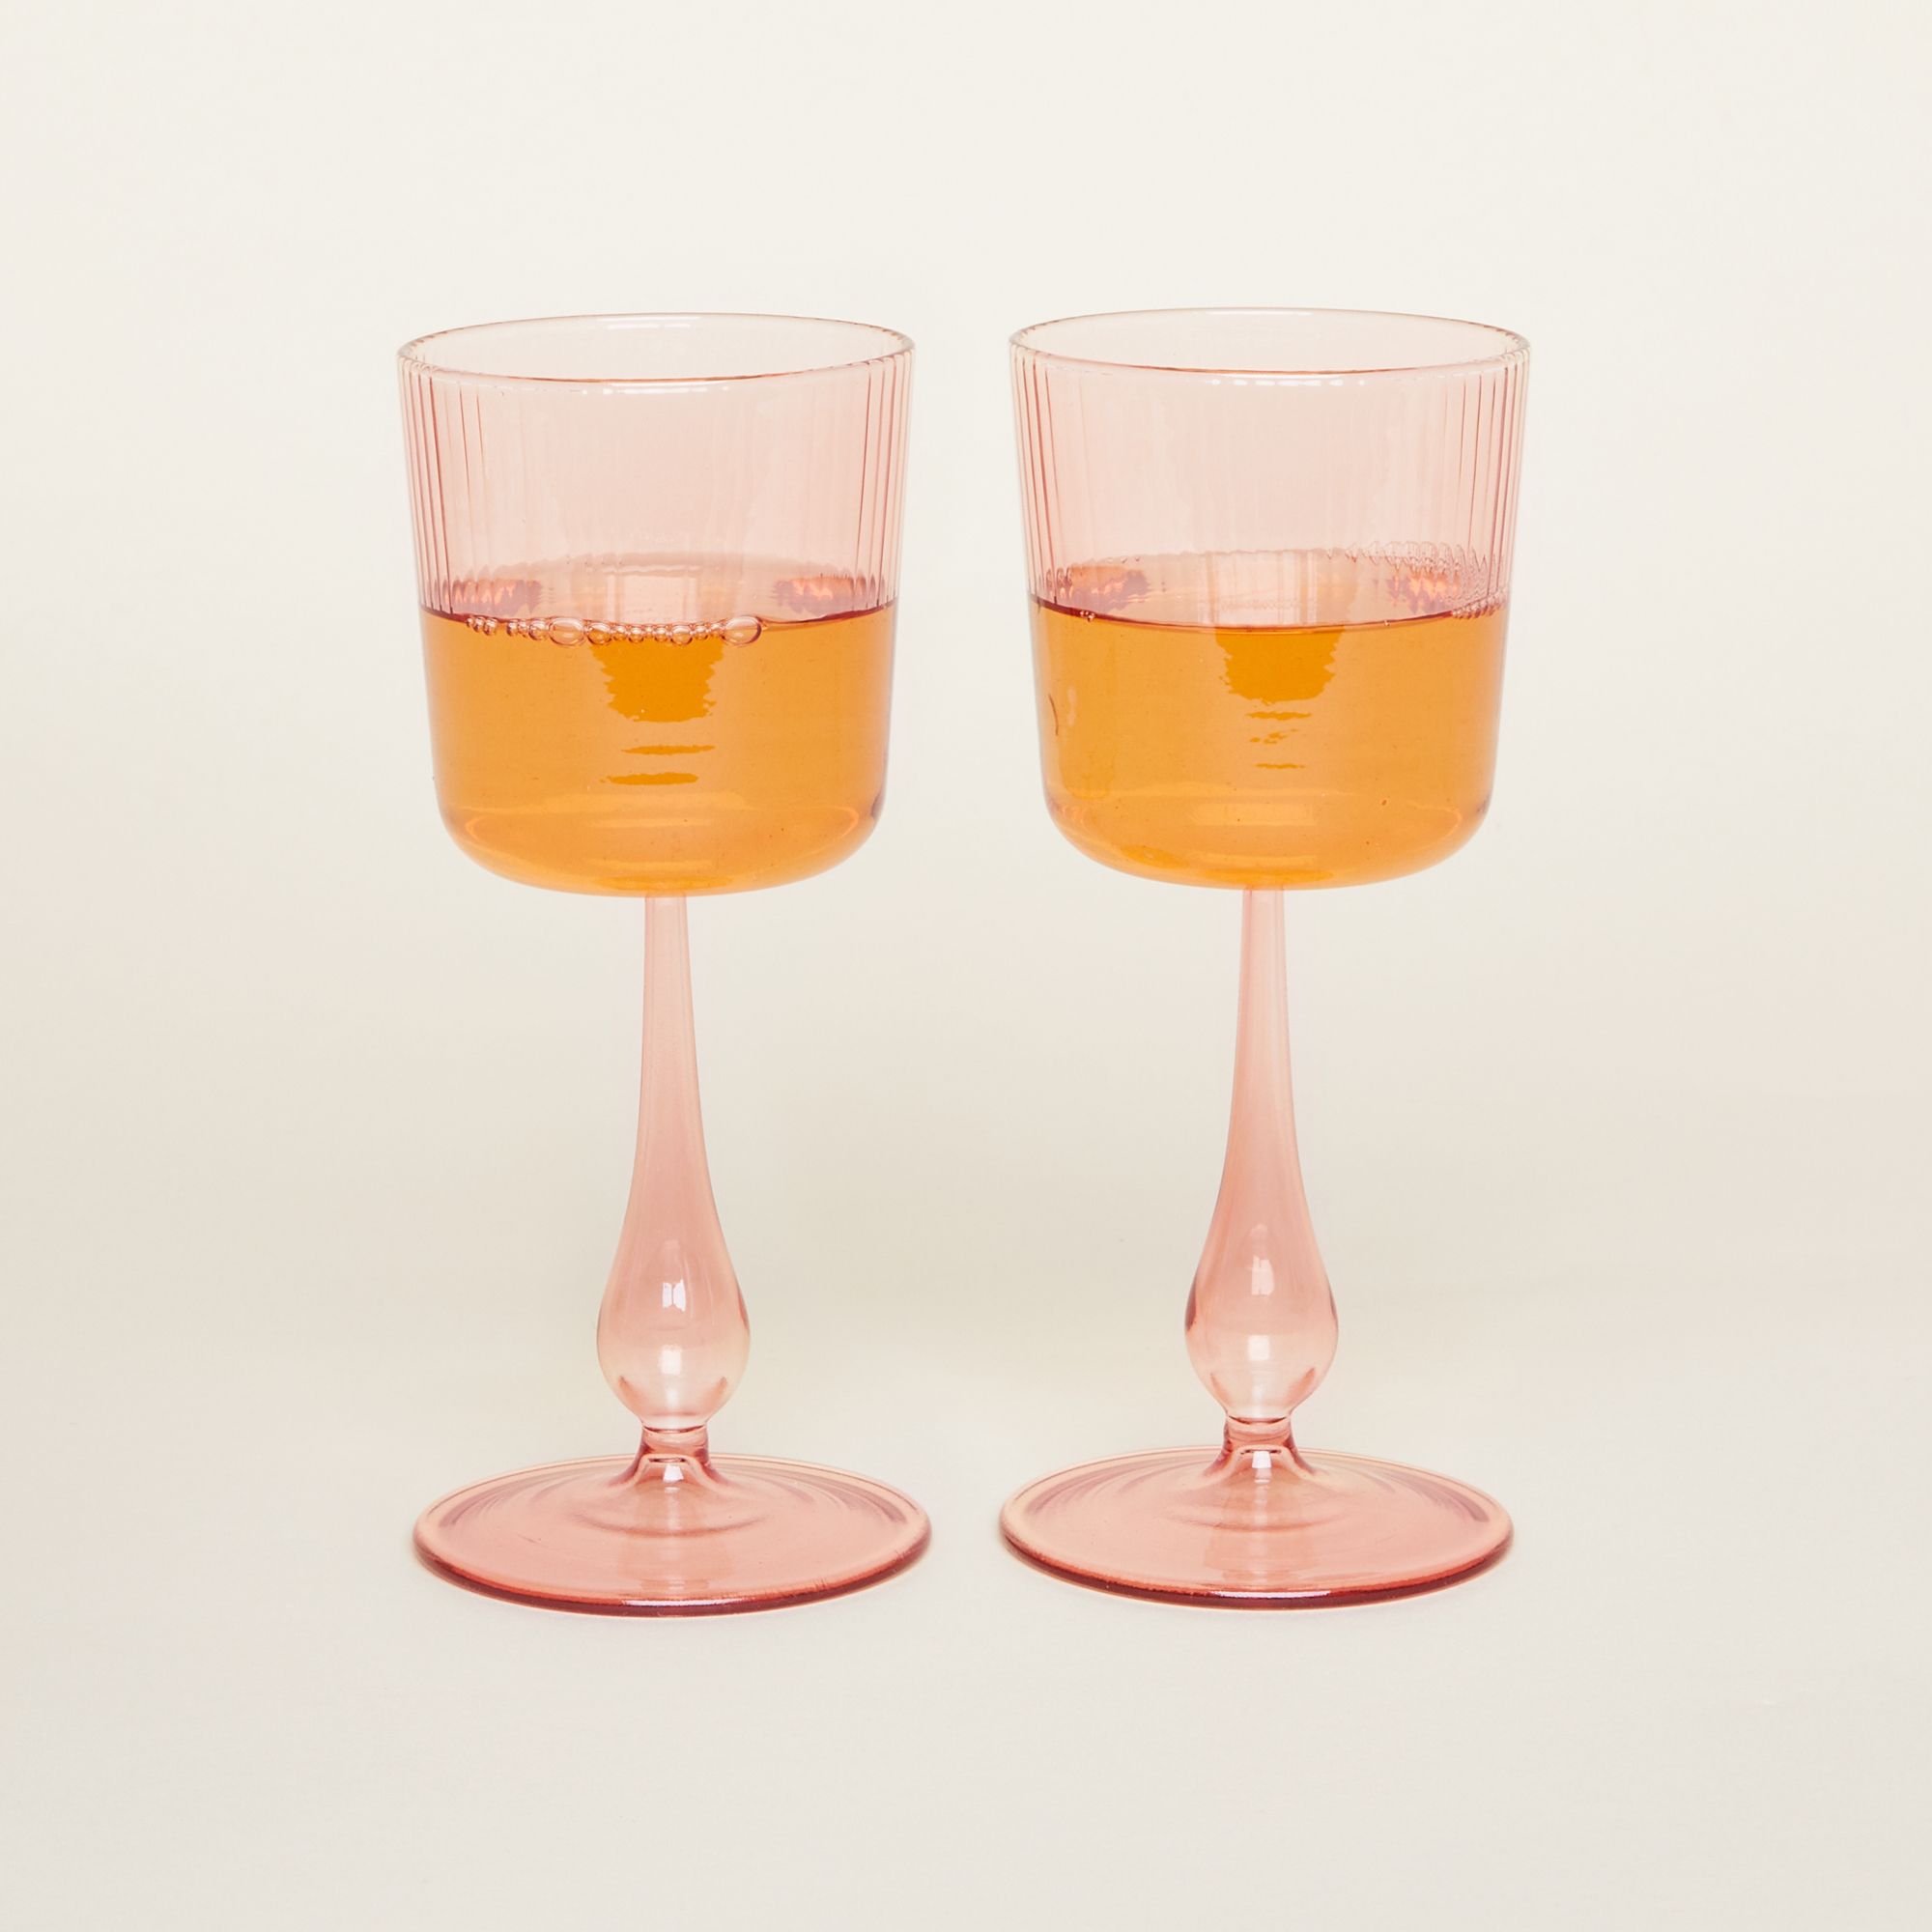 Stemmed wine glasses with grooves on the cup and stems that bow out at the end before their foot. They come in three colors: pale yellow, pale green and pale pink.